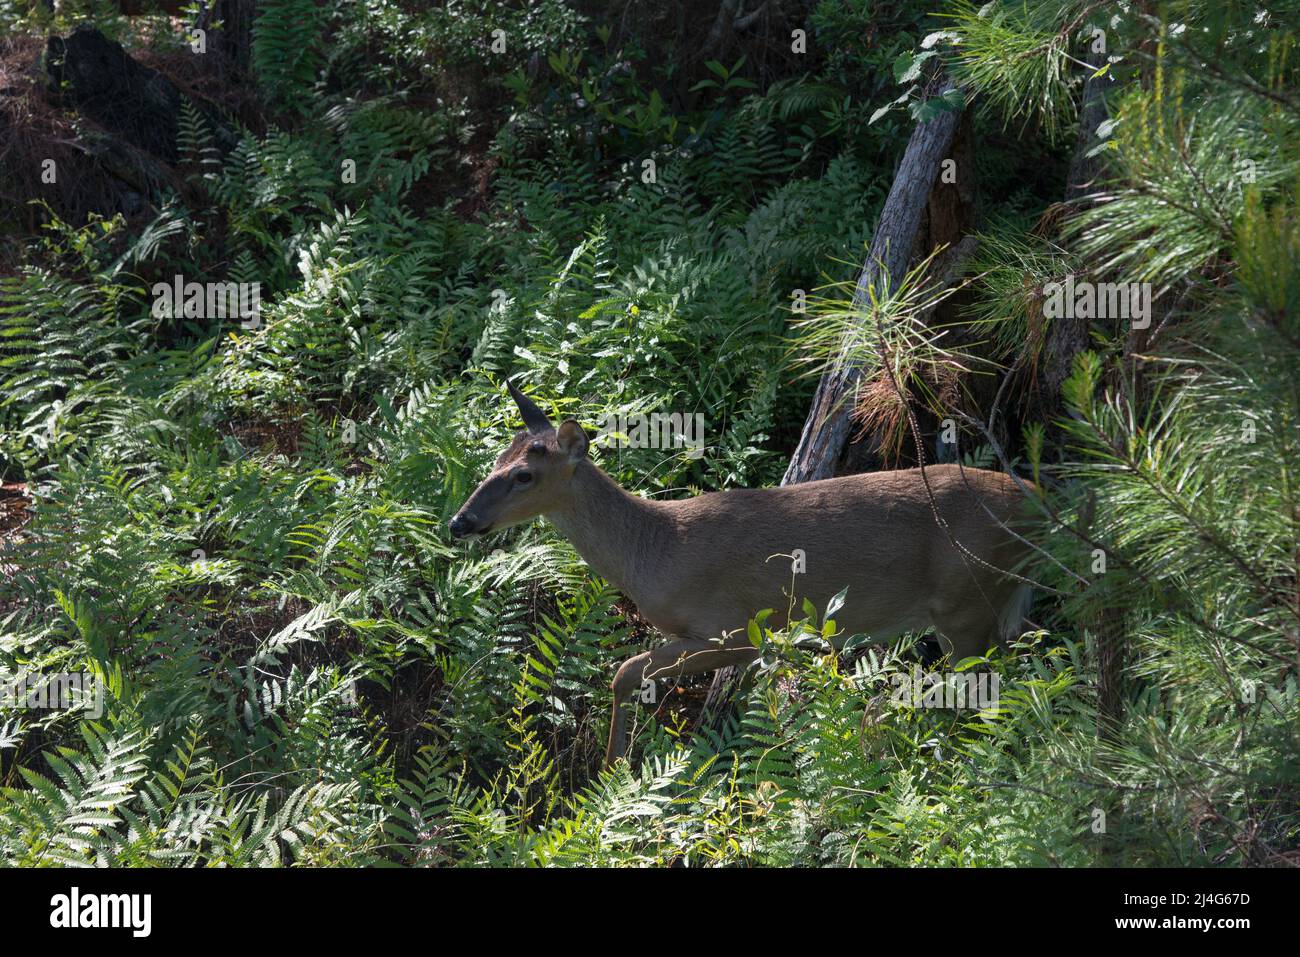 A male white tailed deer walks through ferns in Stephen Foster State Park in the Okefenokee National Wildlife Refuge, Georgia, USA Stock Photo